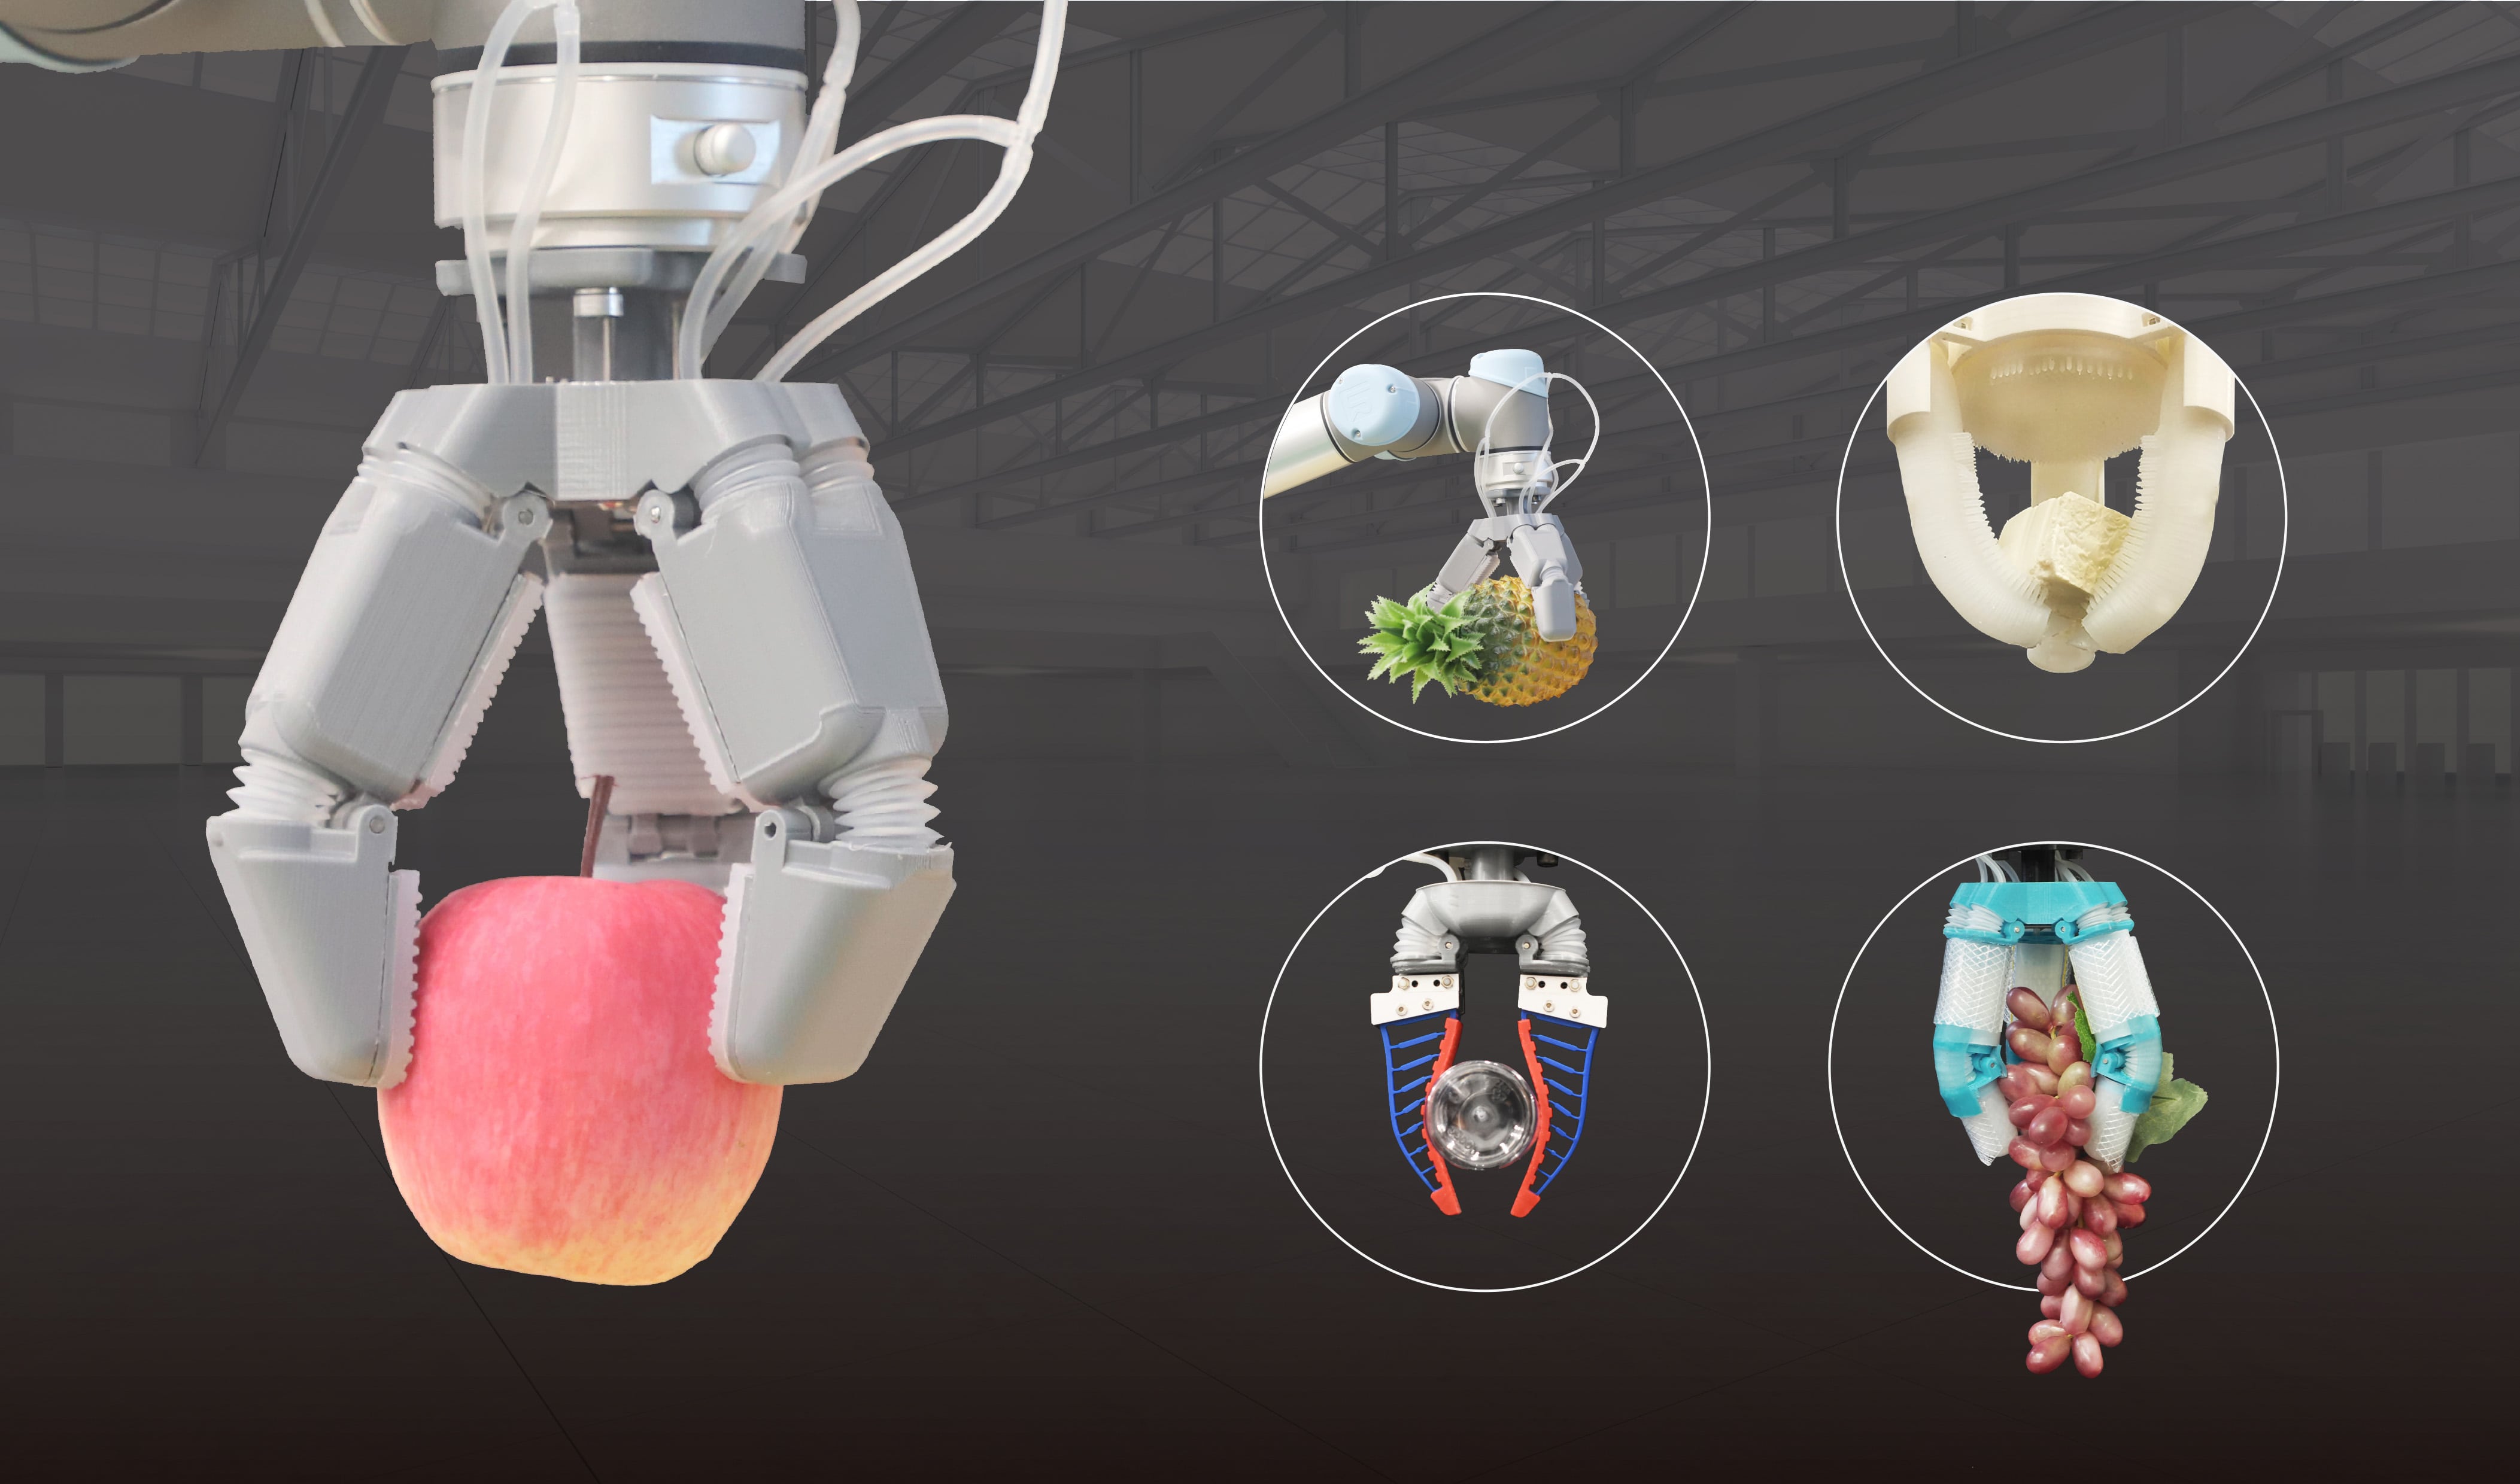 The soft robotic finger developed for grasping delicate objects such as bean curd, fruits, etc.